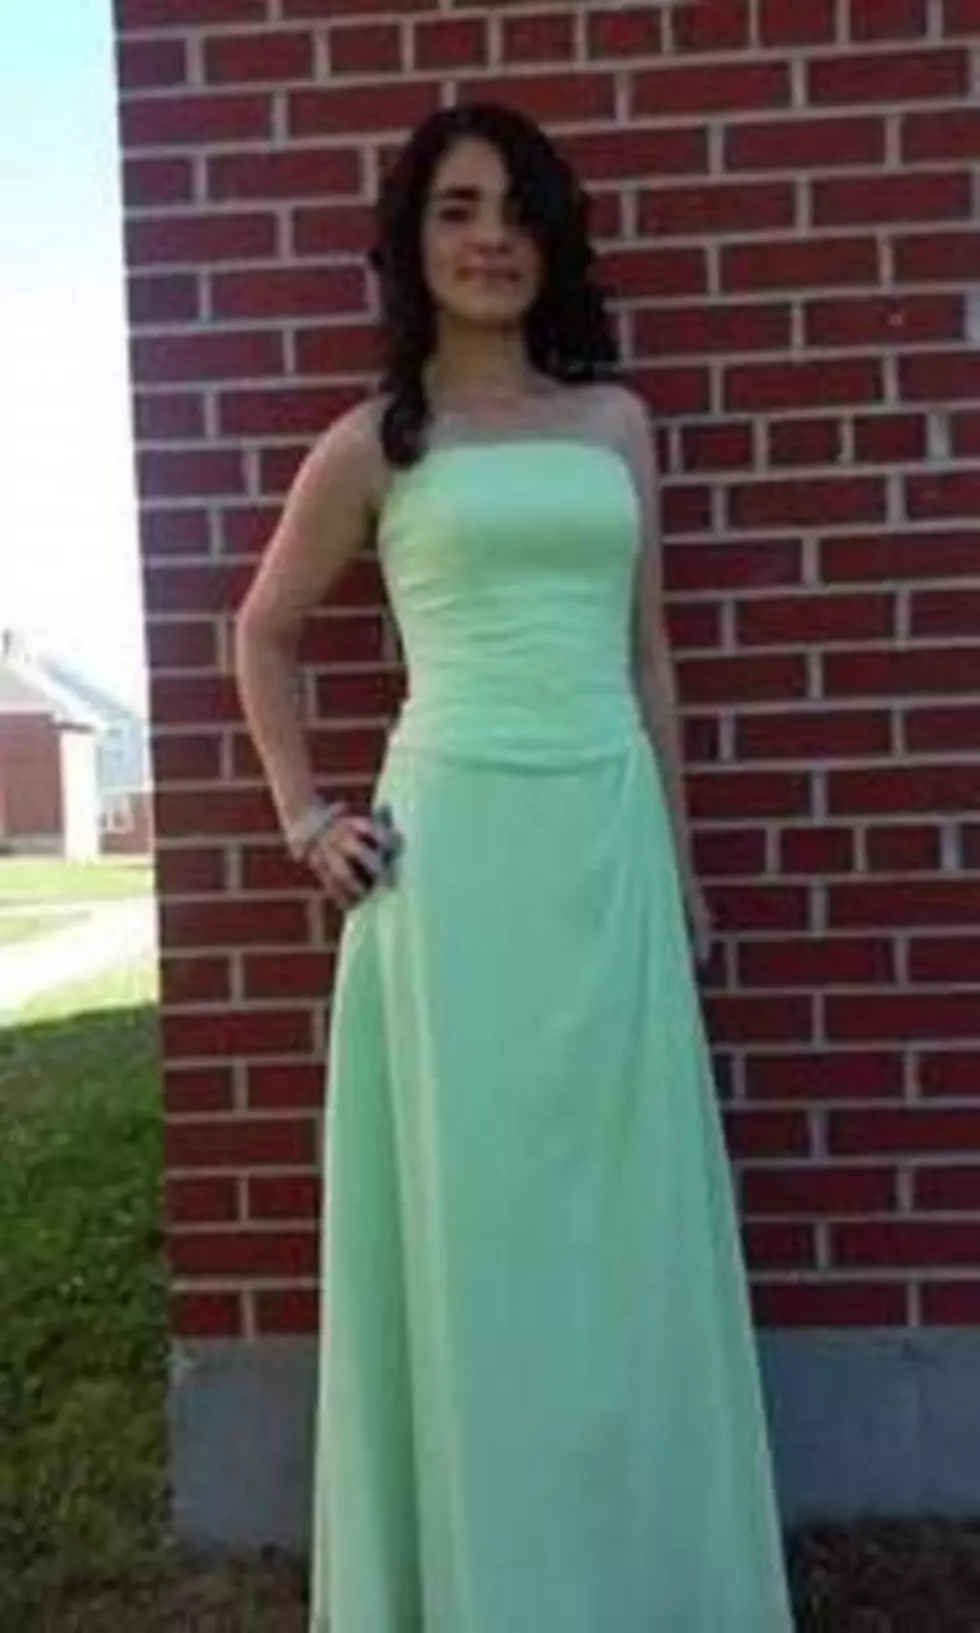 Missing New Bedford Teen Found